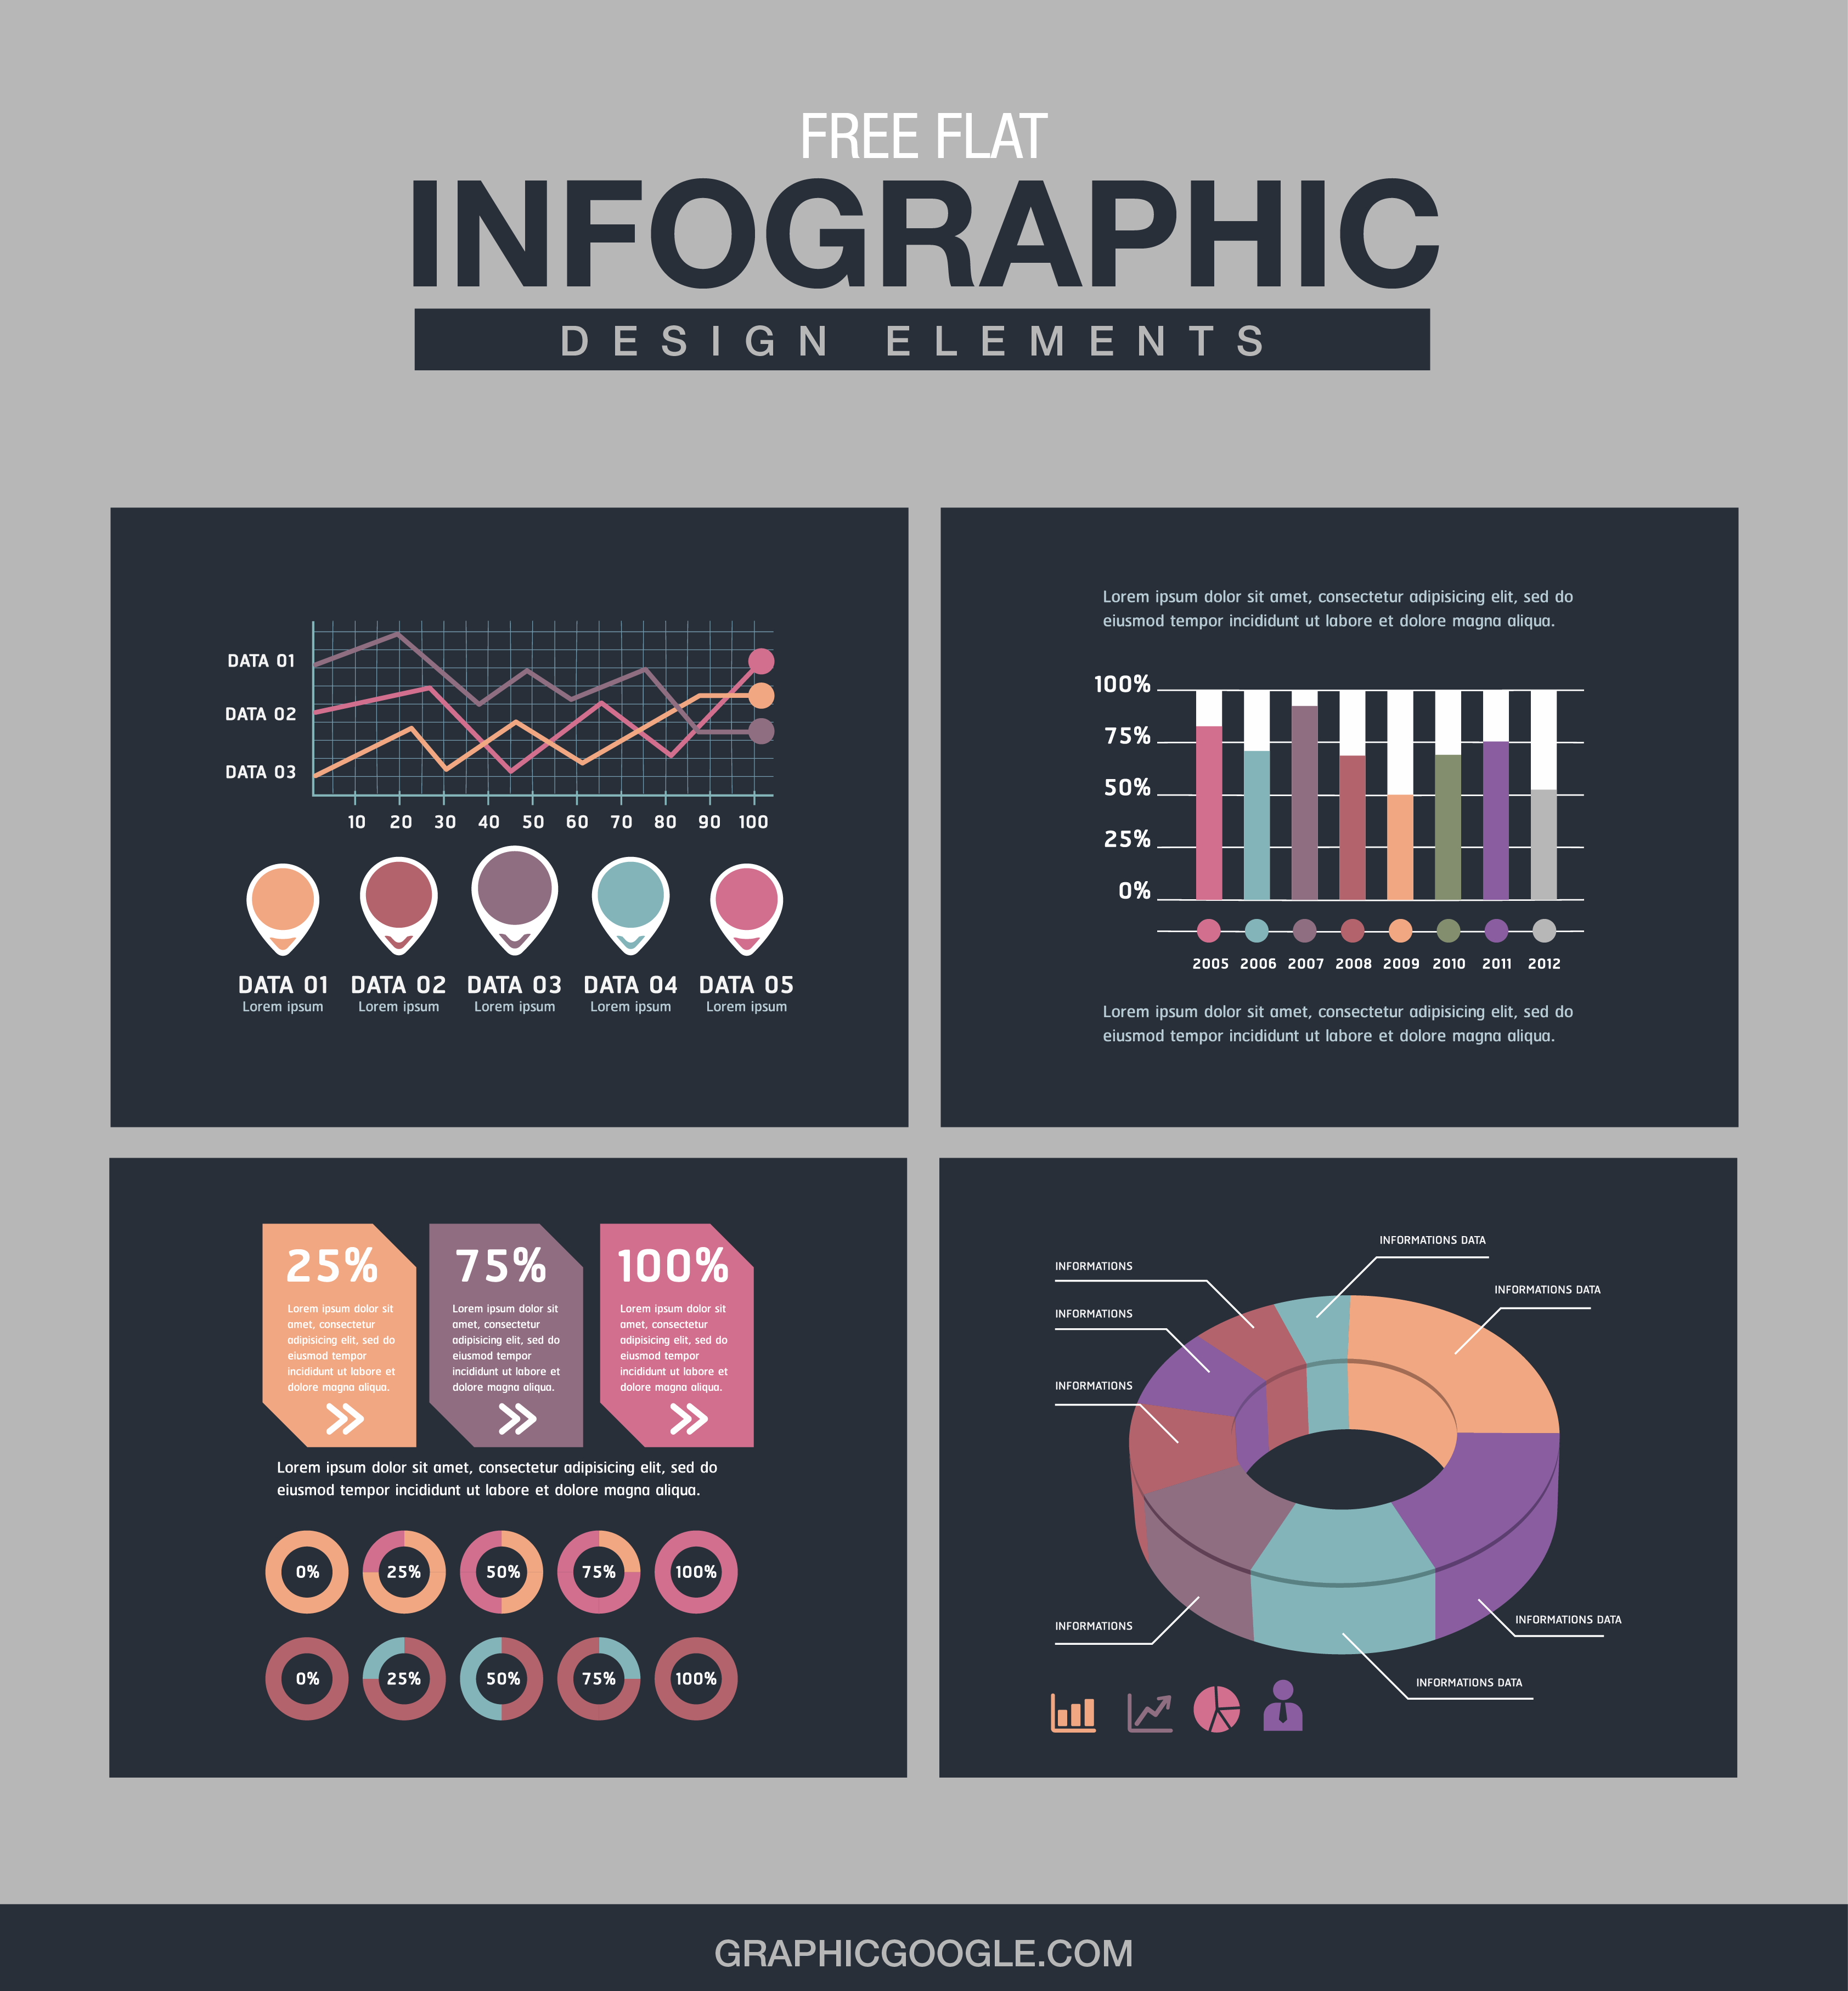 Infographic elements collection | Free Vector